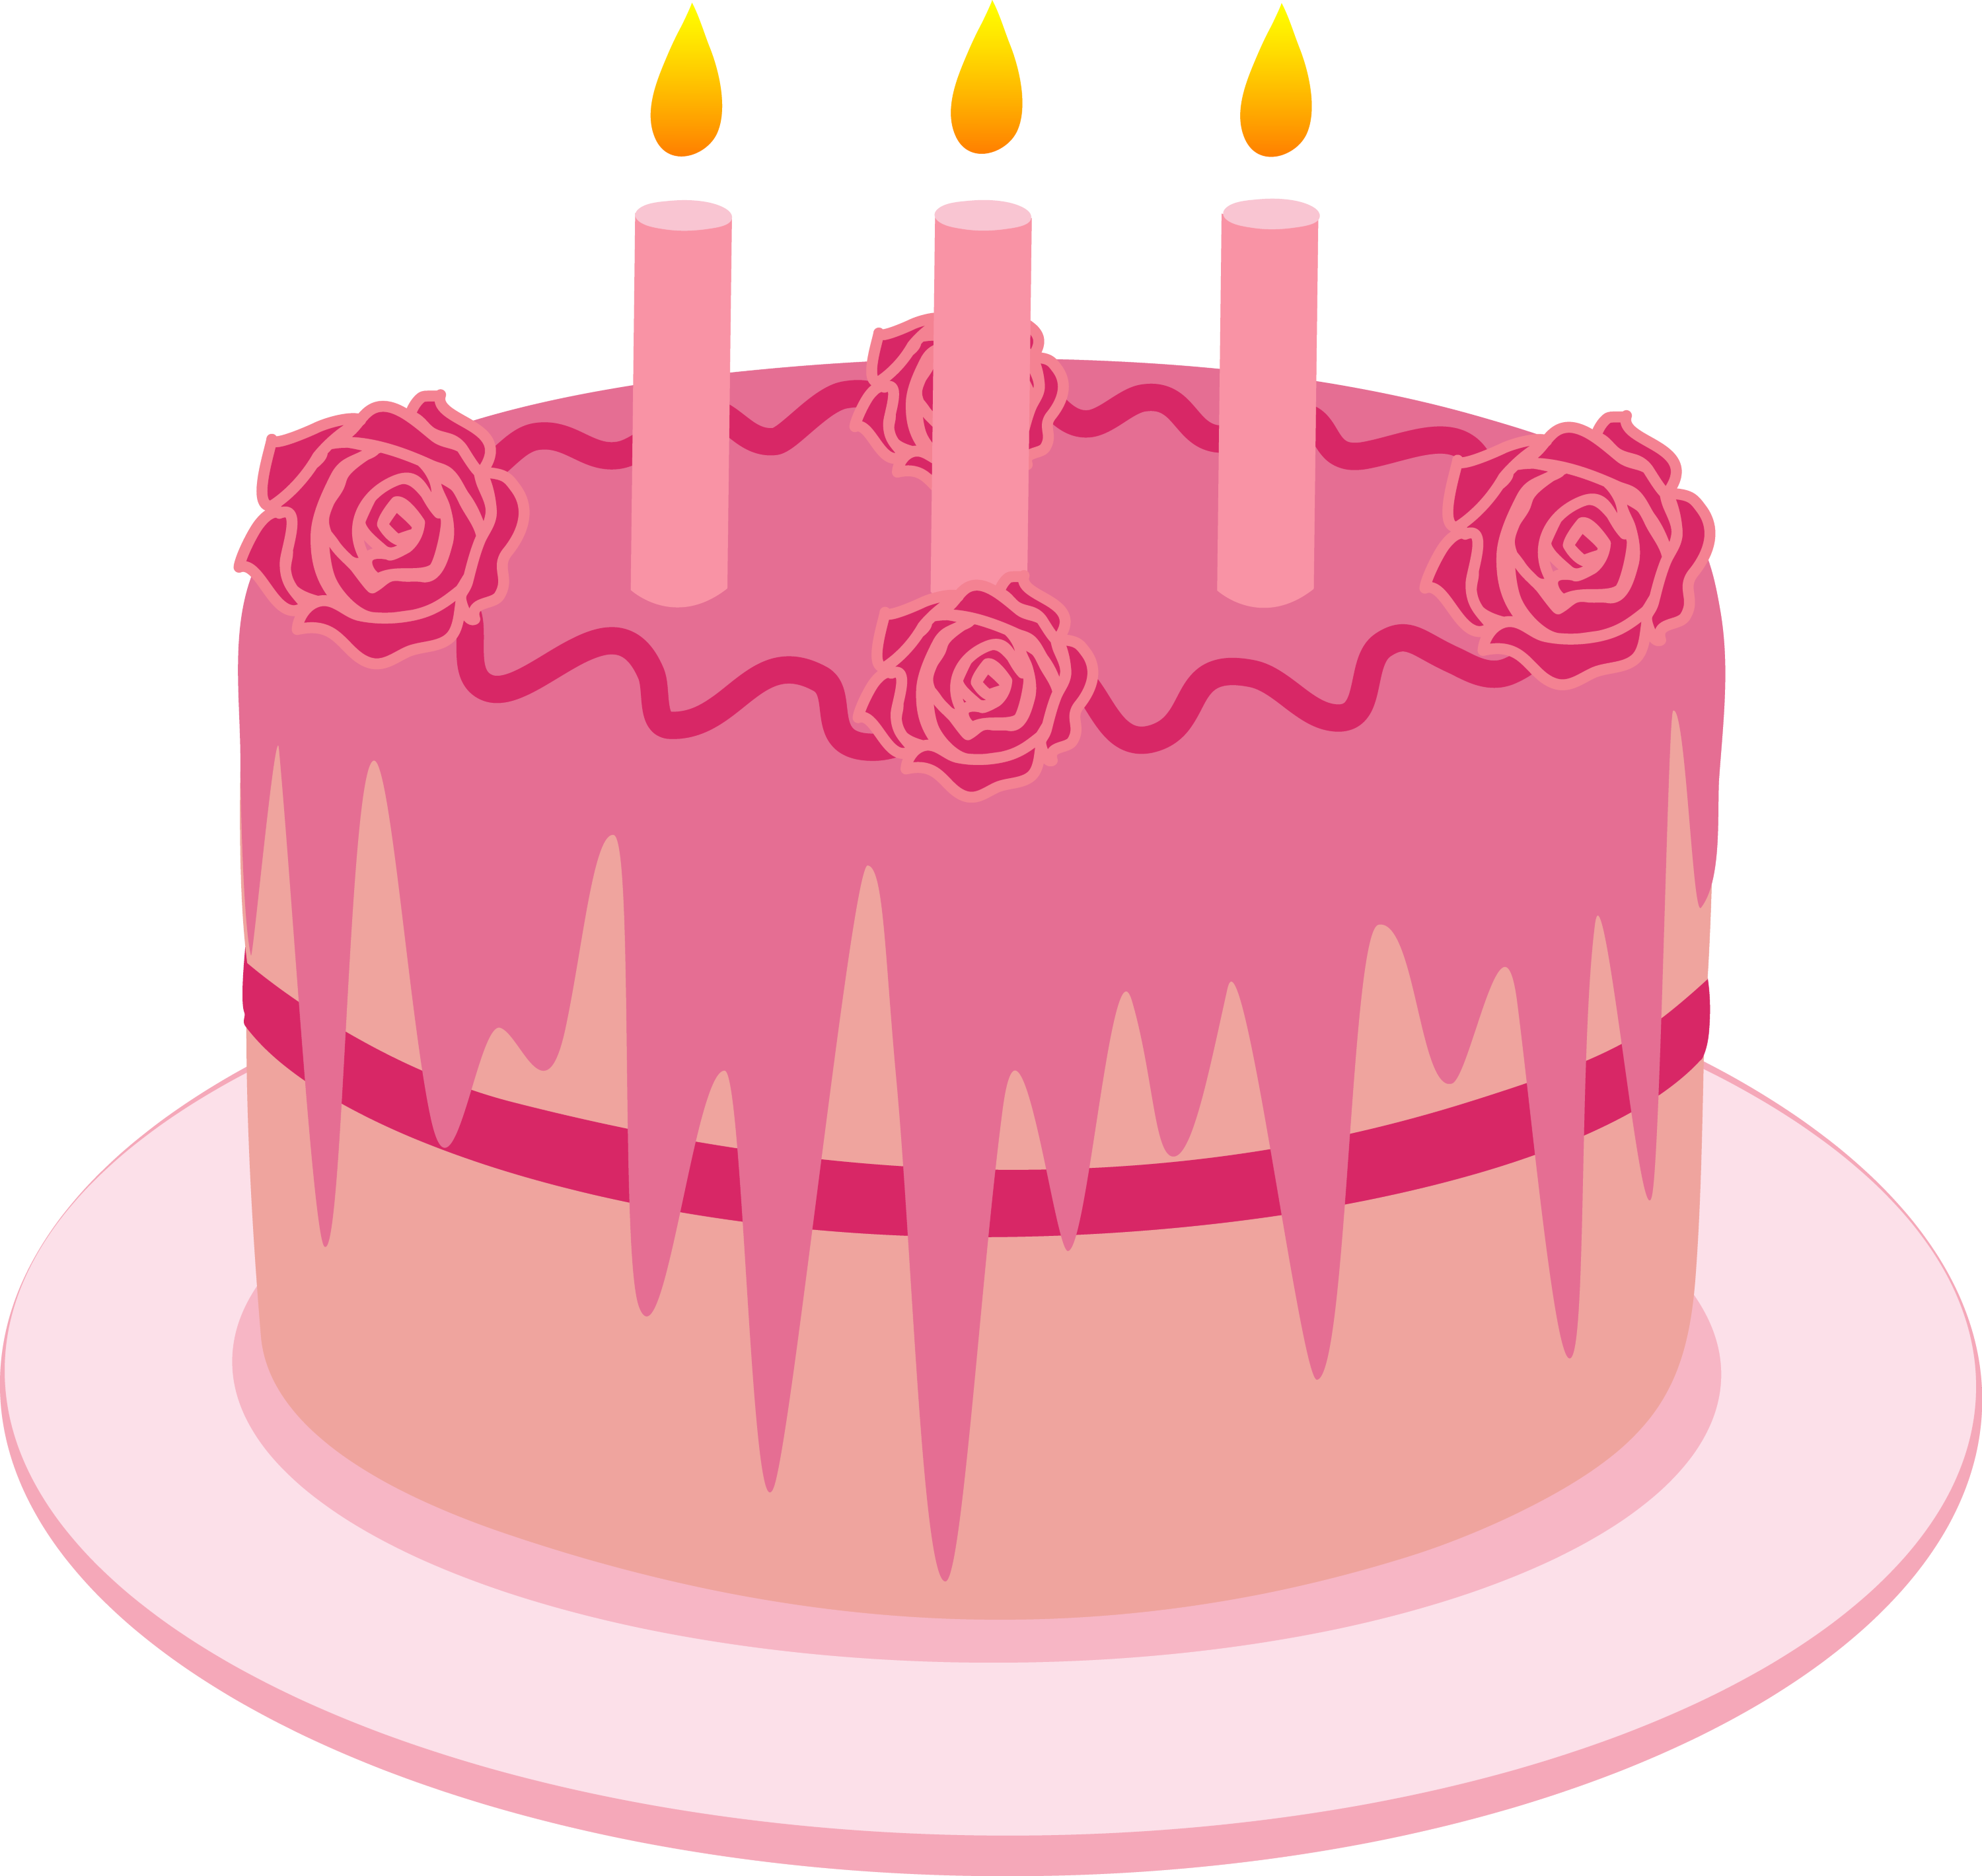 Strawberry Birthday Cake With Candles - Free Clip Art